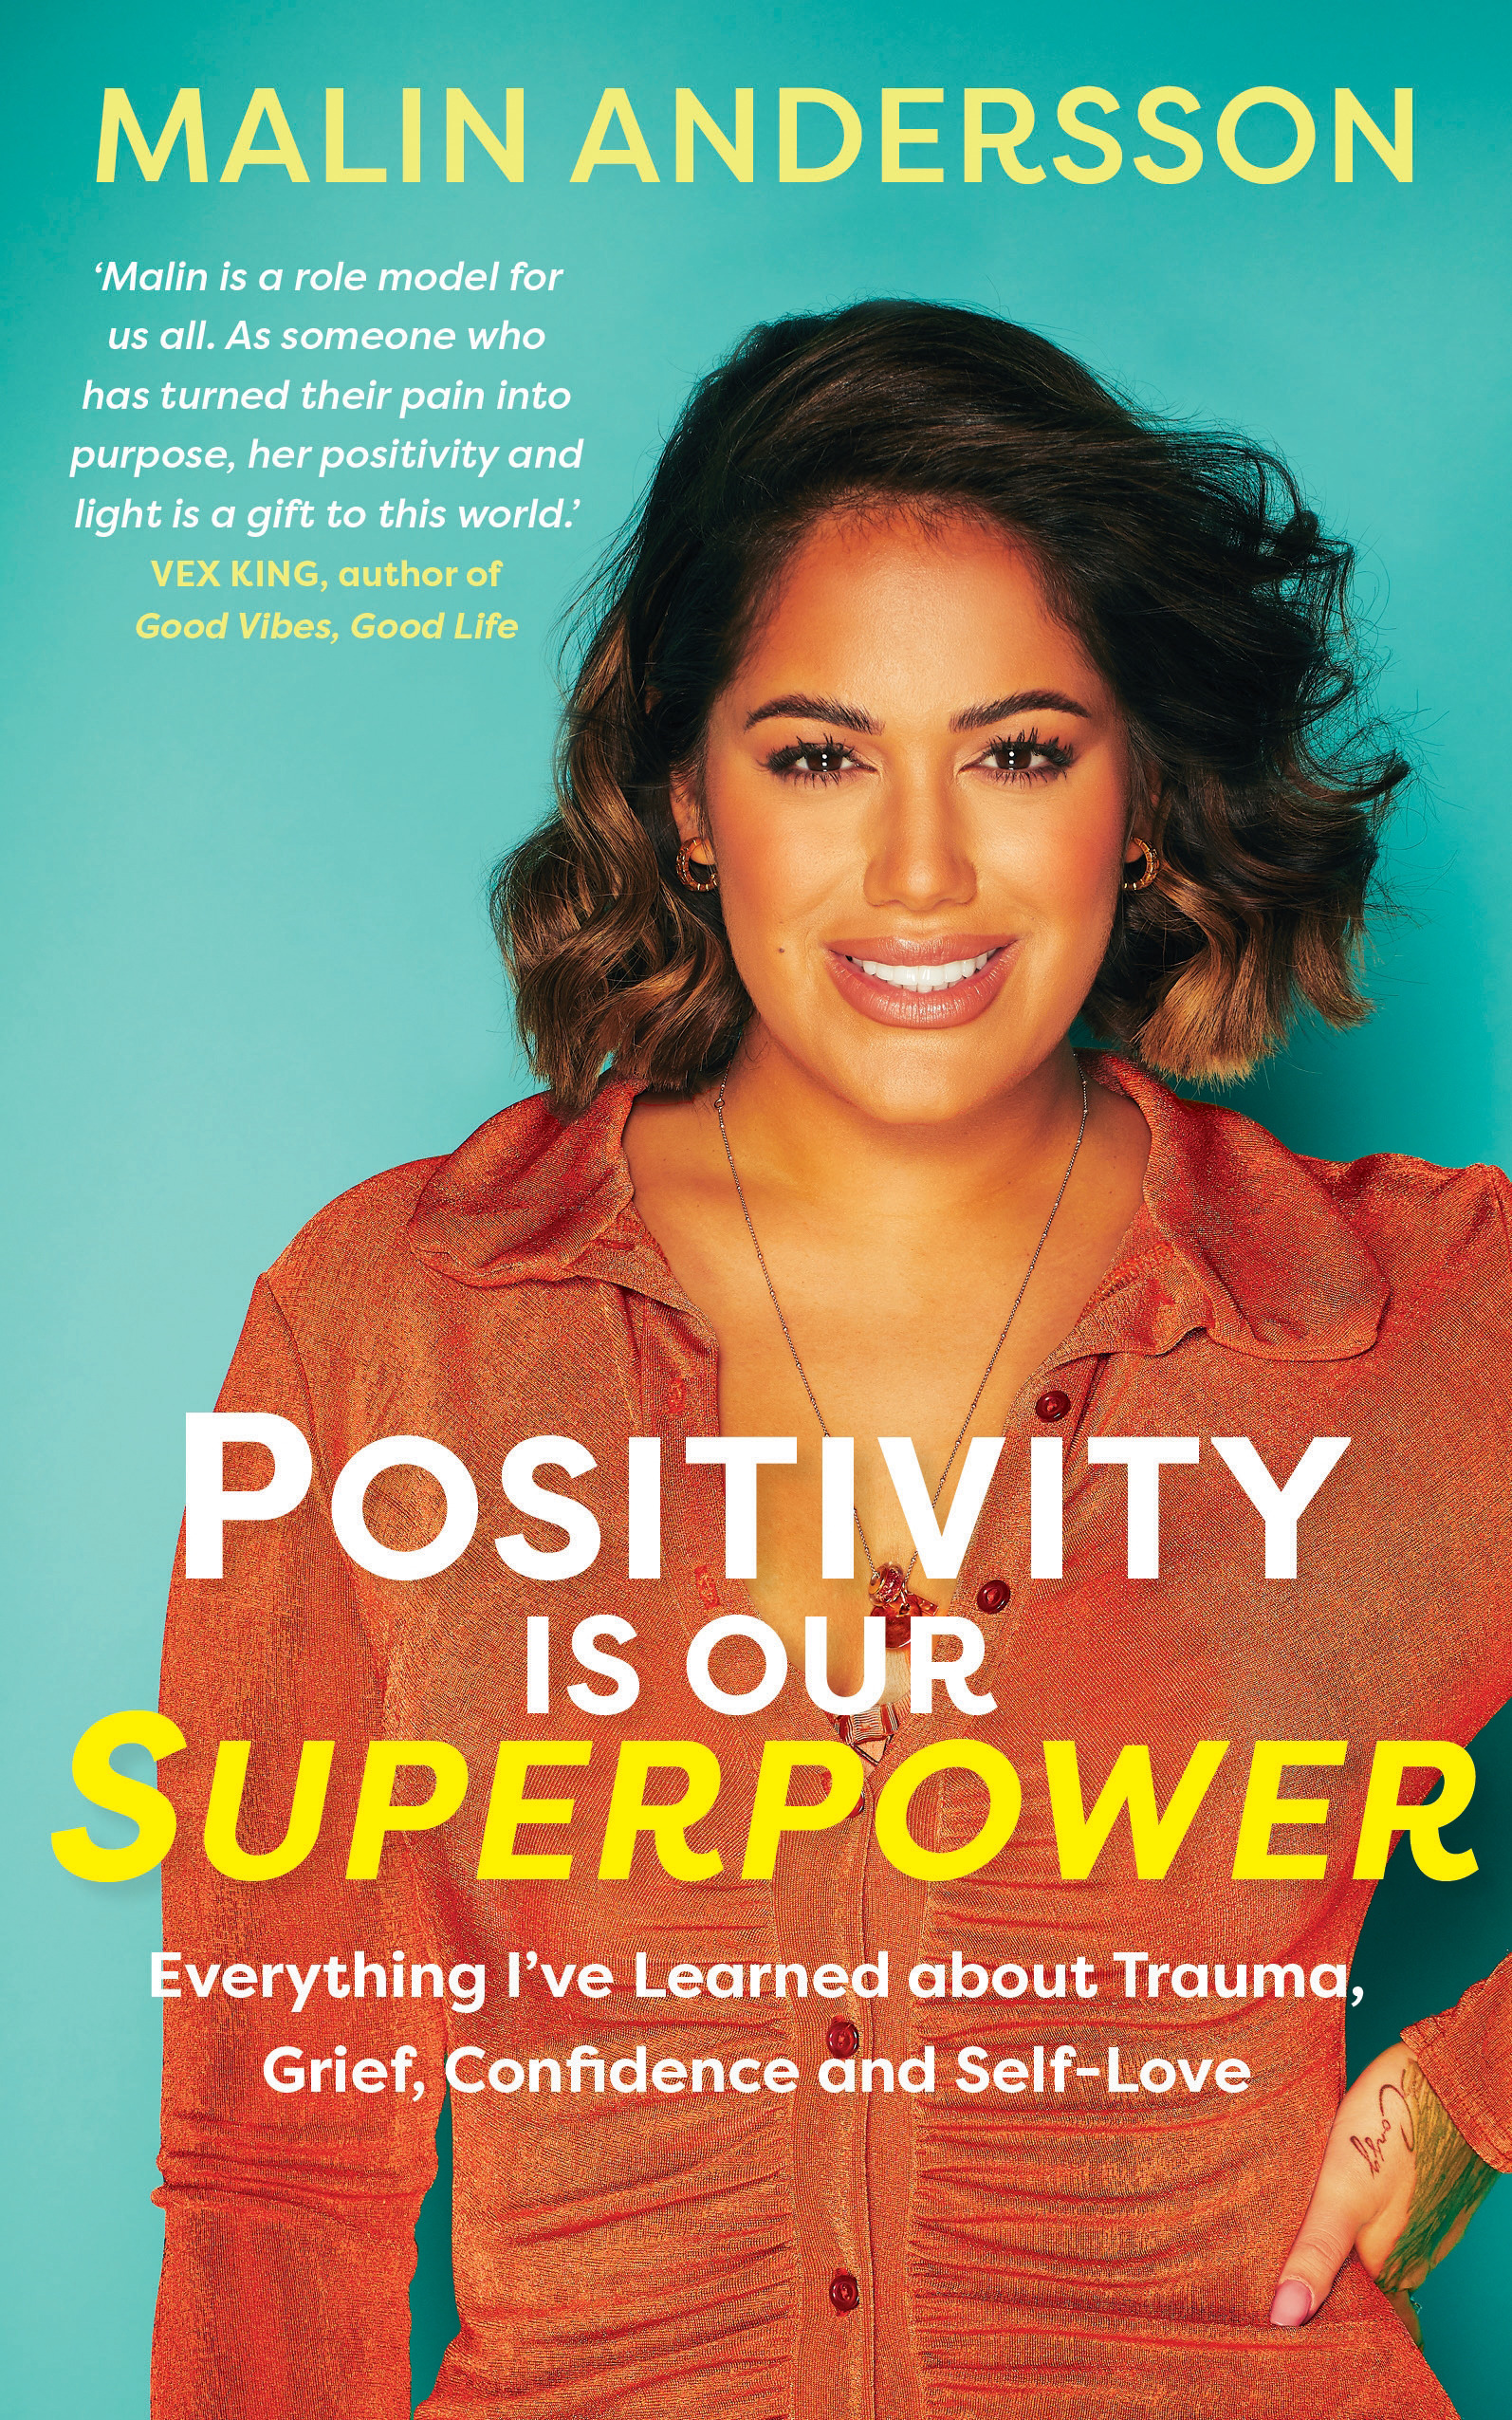 Positivity Is Our Superpower : Everything I've Learned about Trauma, Grief, Confidence and Self-Love | Psychology & Self-Improvement